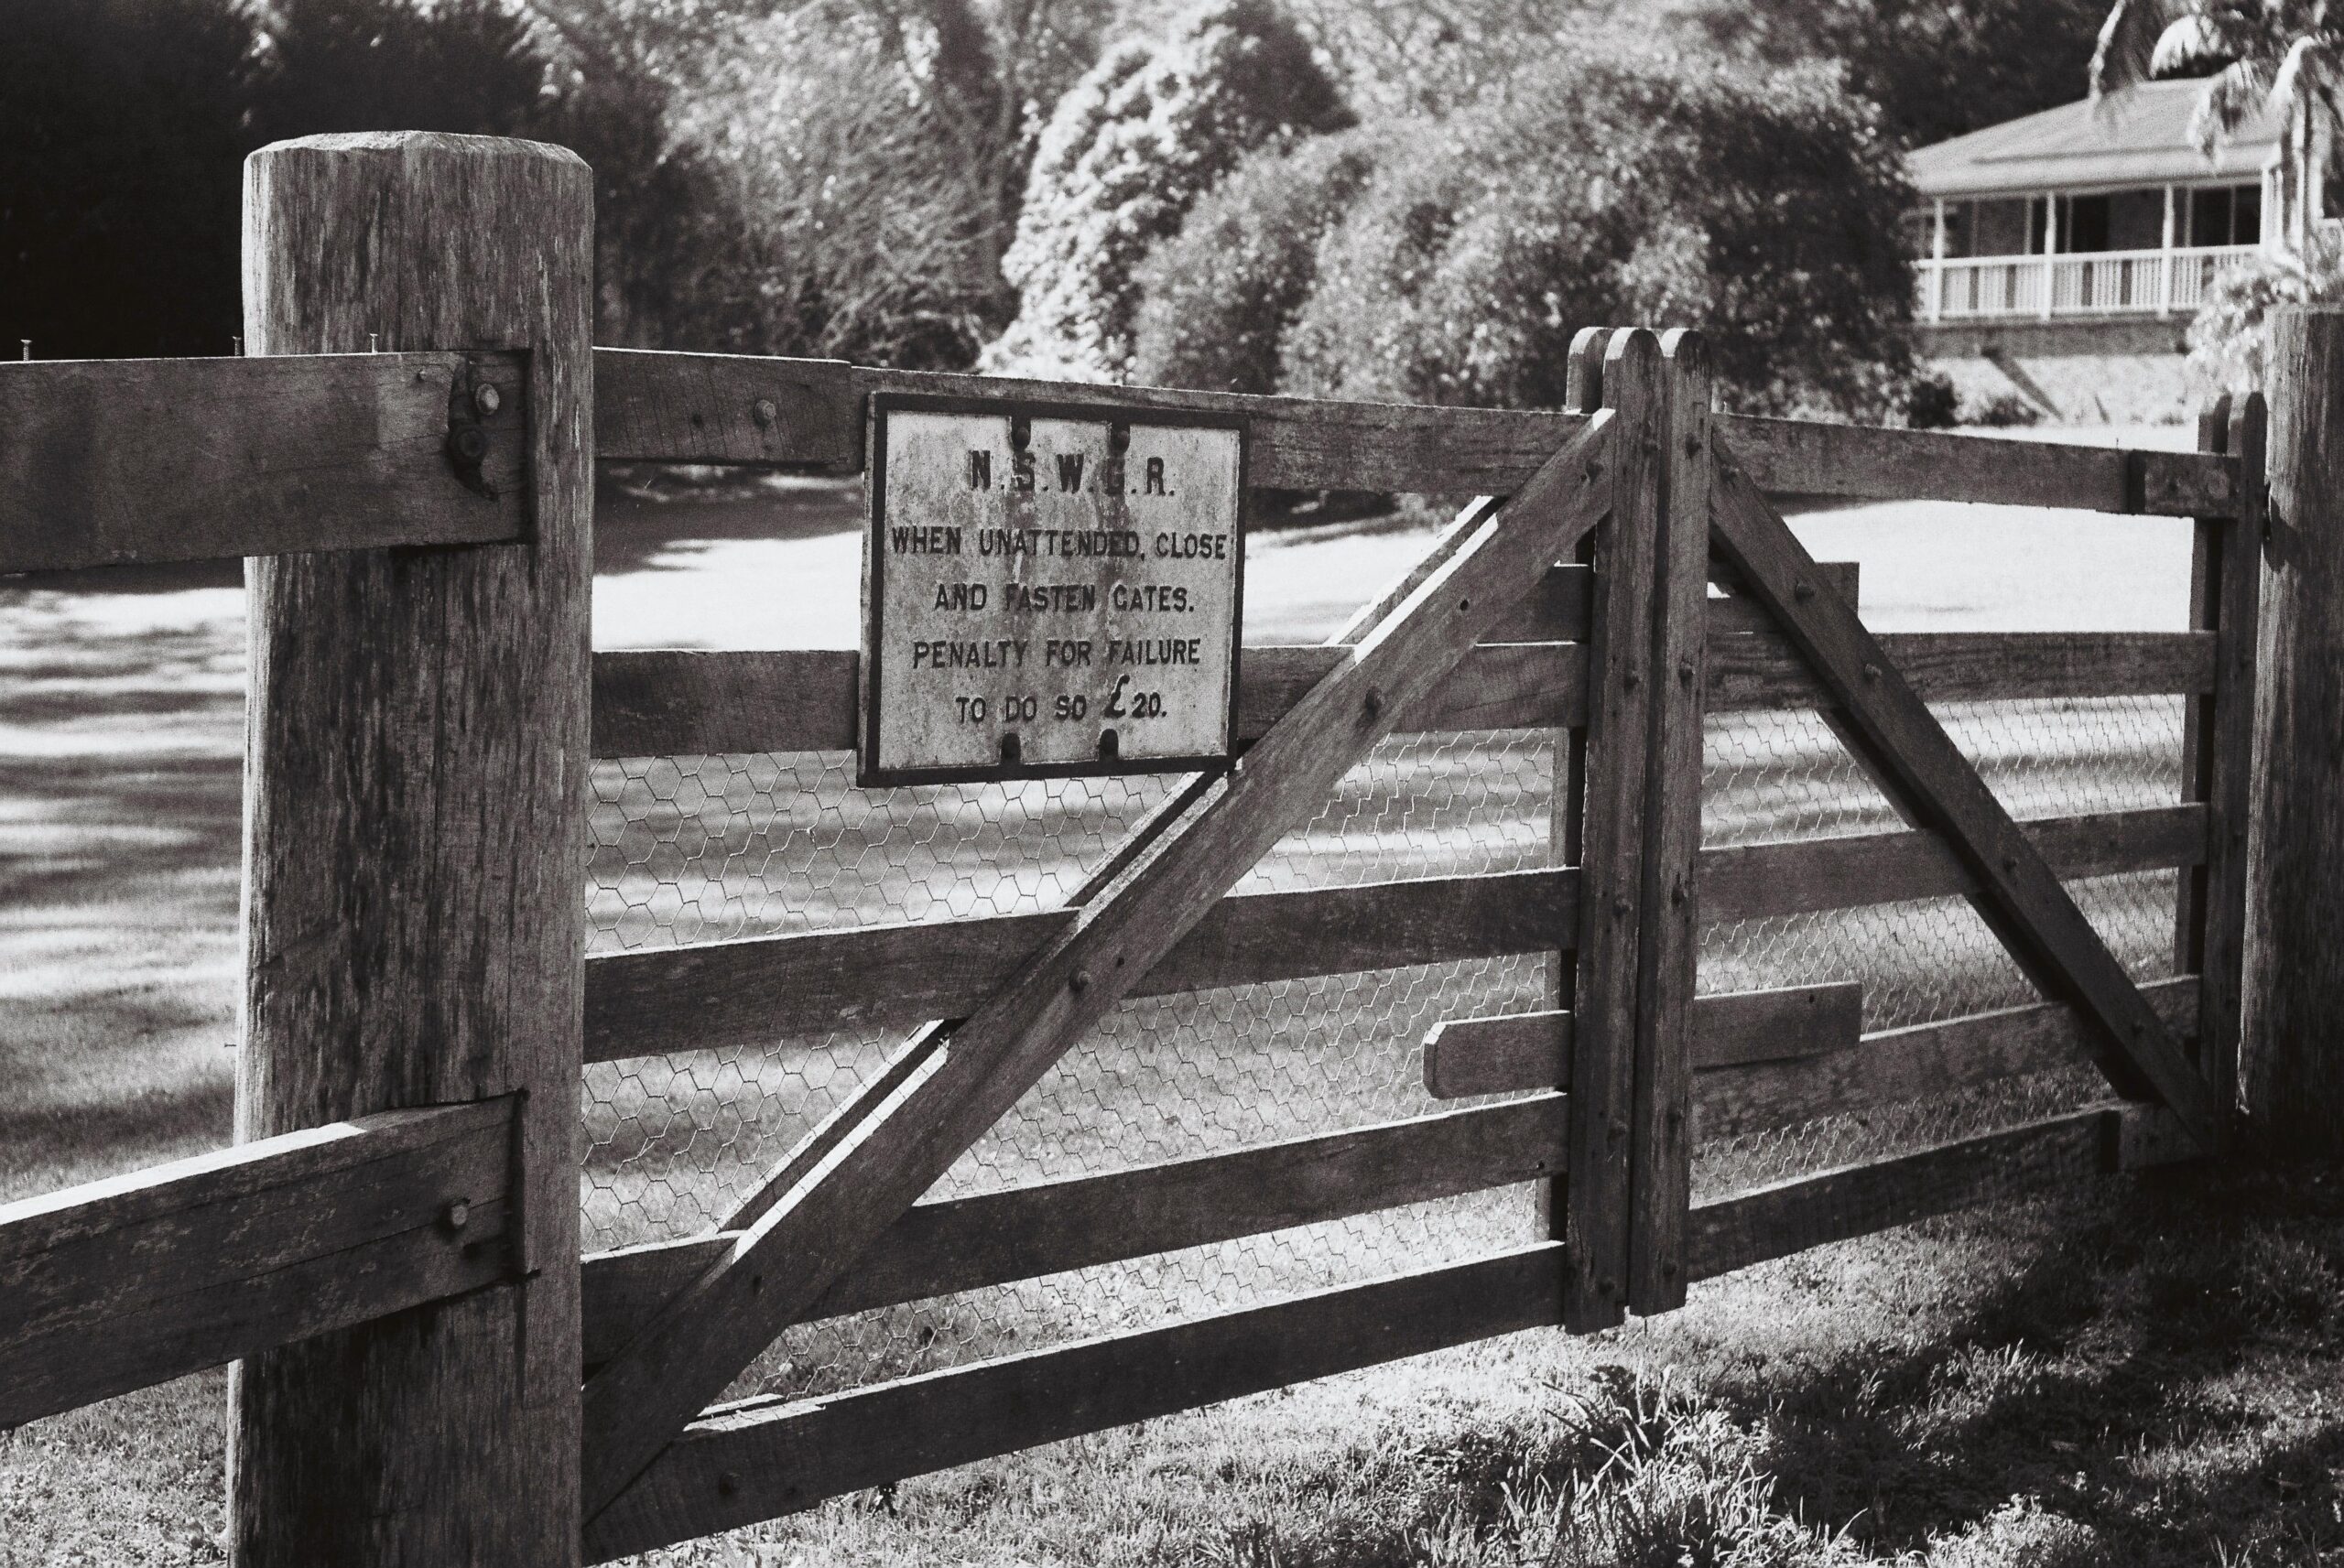 And yes, the Agfa still provides images. This one from Ilford FP4 film, a shot of our neighbour’s side gate. He collects old NWS Government Railway signs, this one is older than the camera